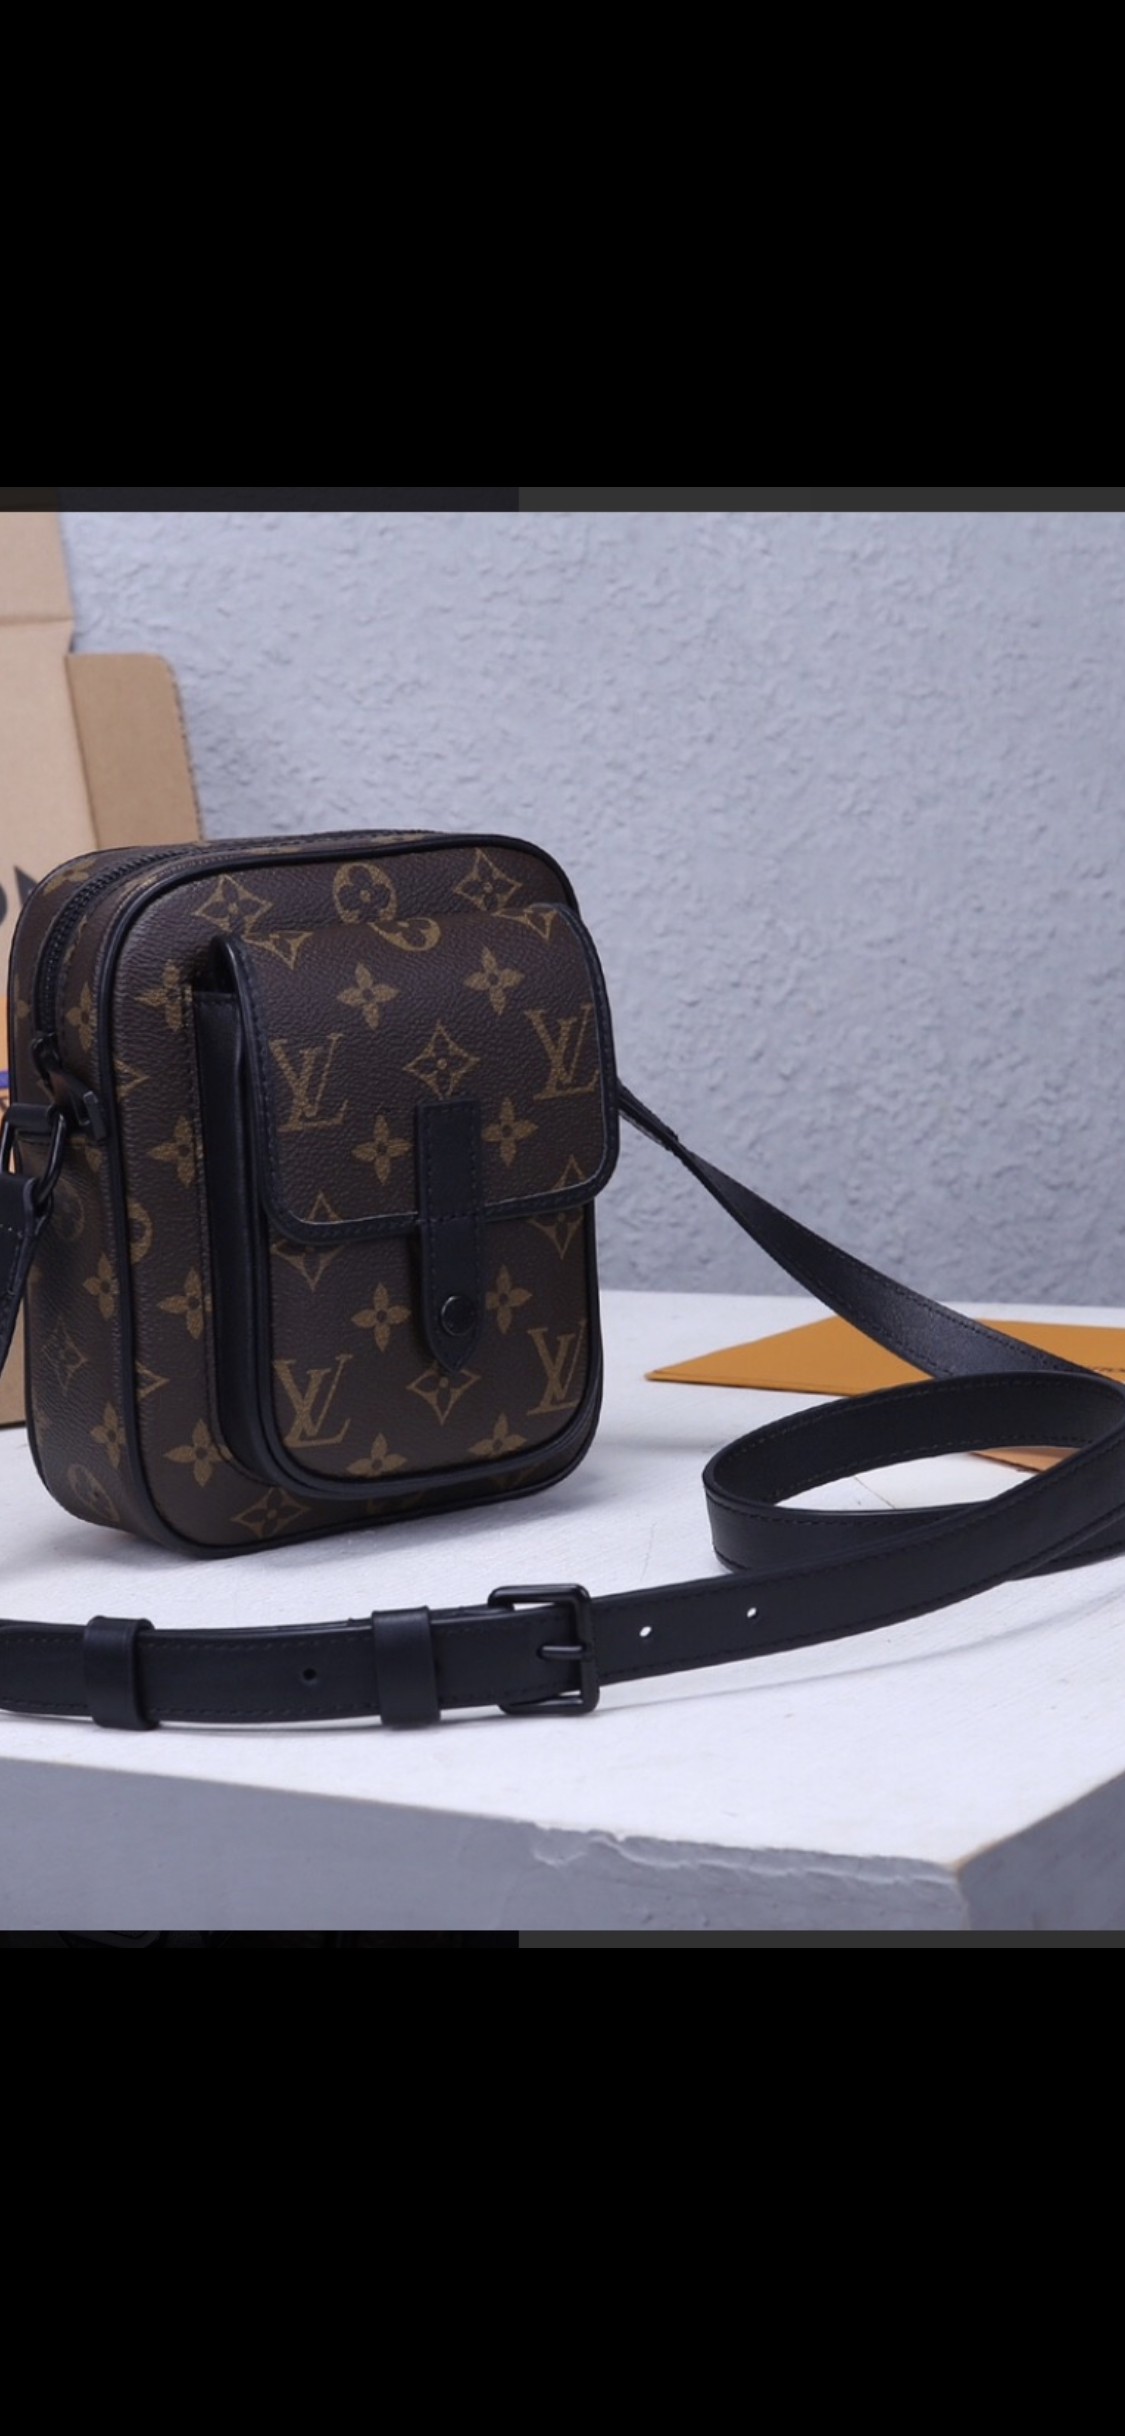 Lv Christopher Wearable Wallet Review